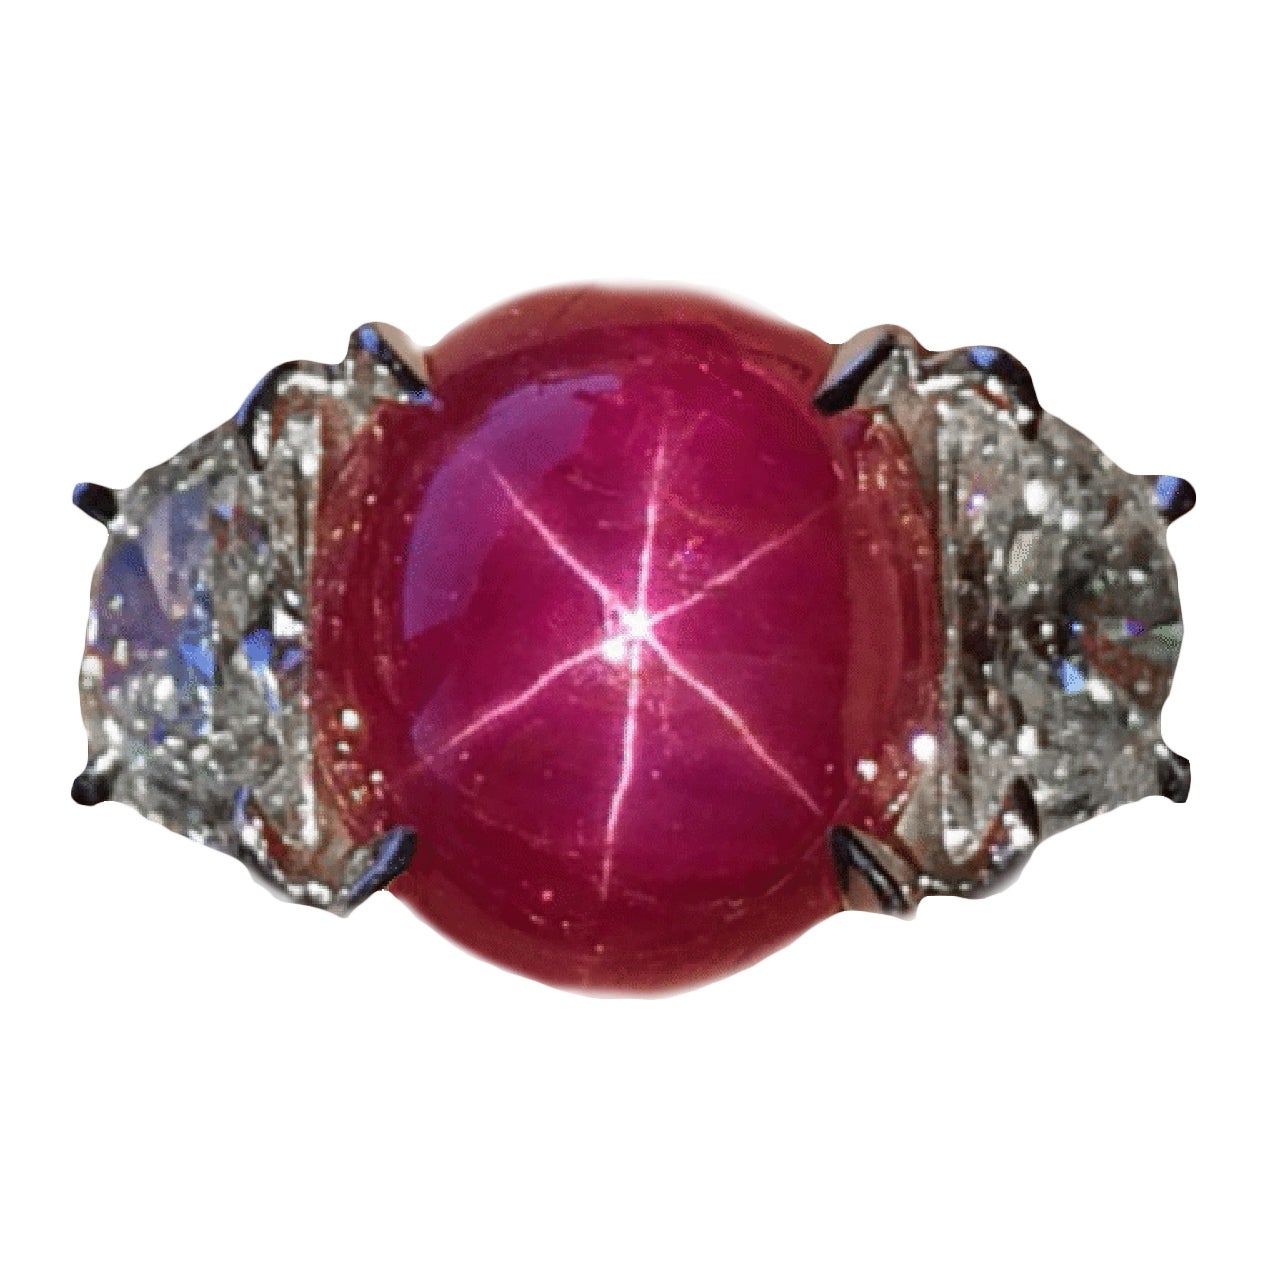 Details about   Burmese Ruby and Diamond Ring in Platinum Over Sterling Silver Size 6 